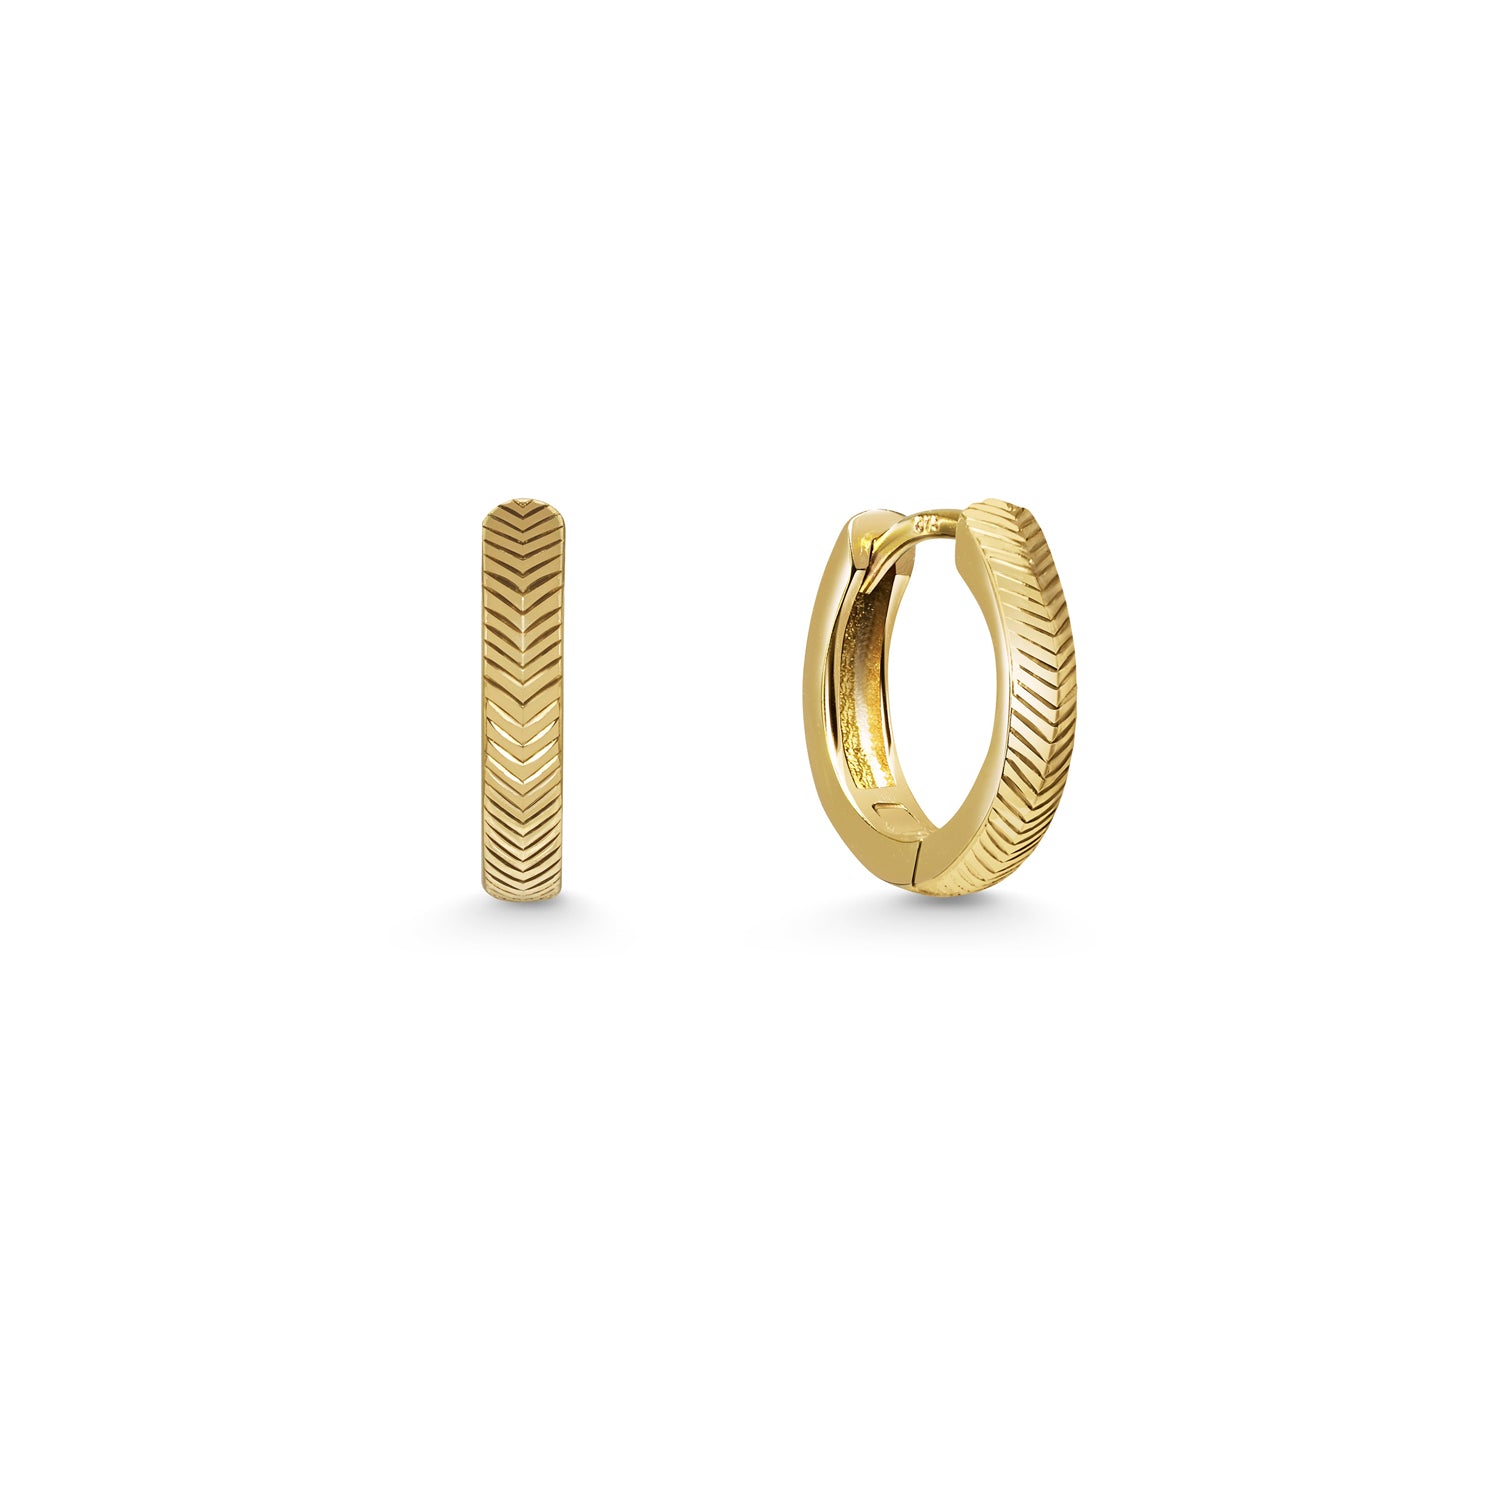 The 12.8mm Engraved Chevron Huggie Hoop Earrings by East London jeweller Rachel Boston | Discover our collections of unique and timeless engagement rings, wedding rings, and modern fine jewellery.